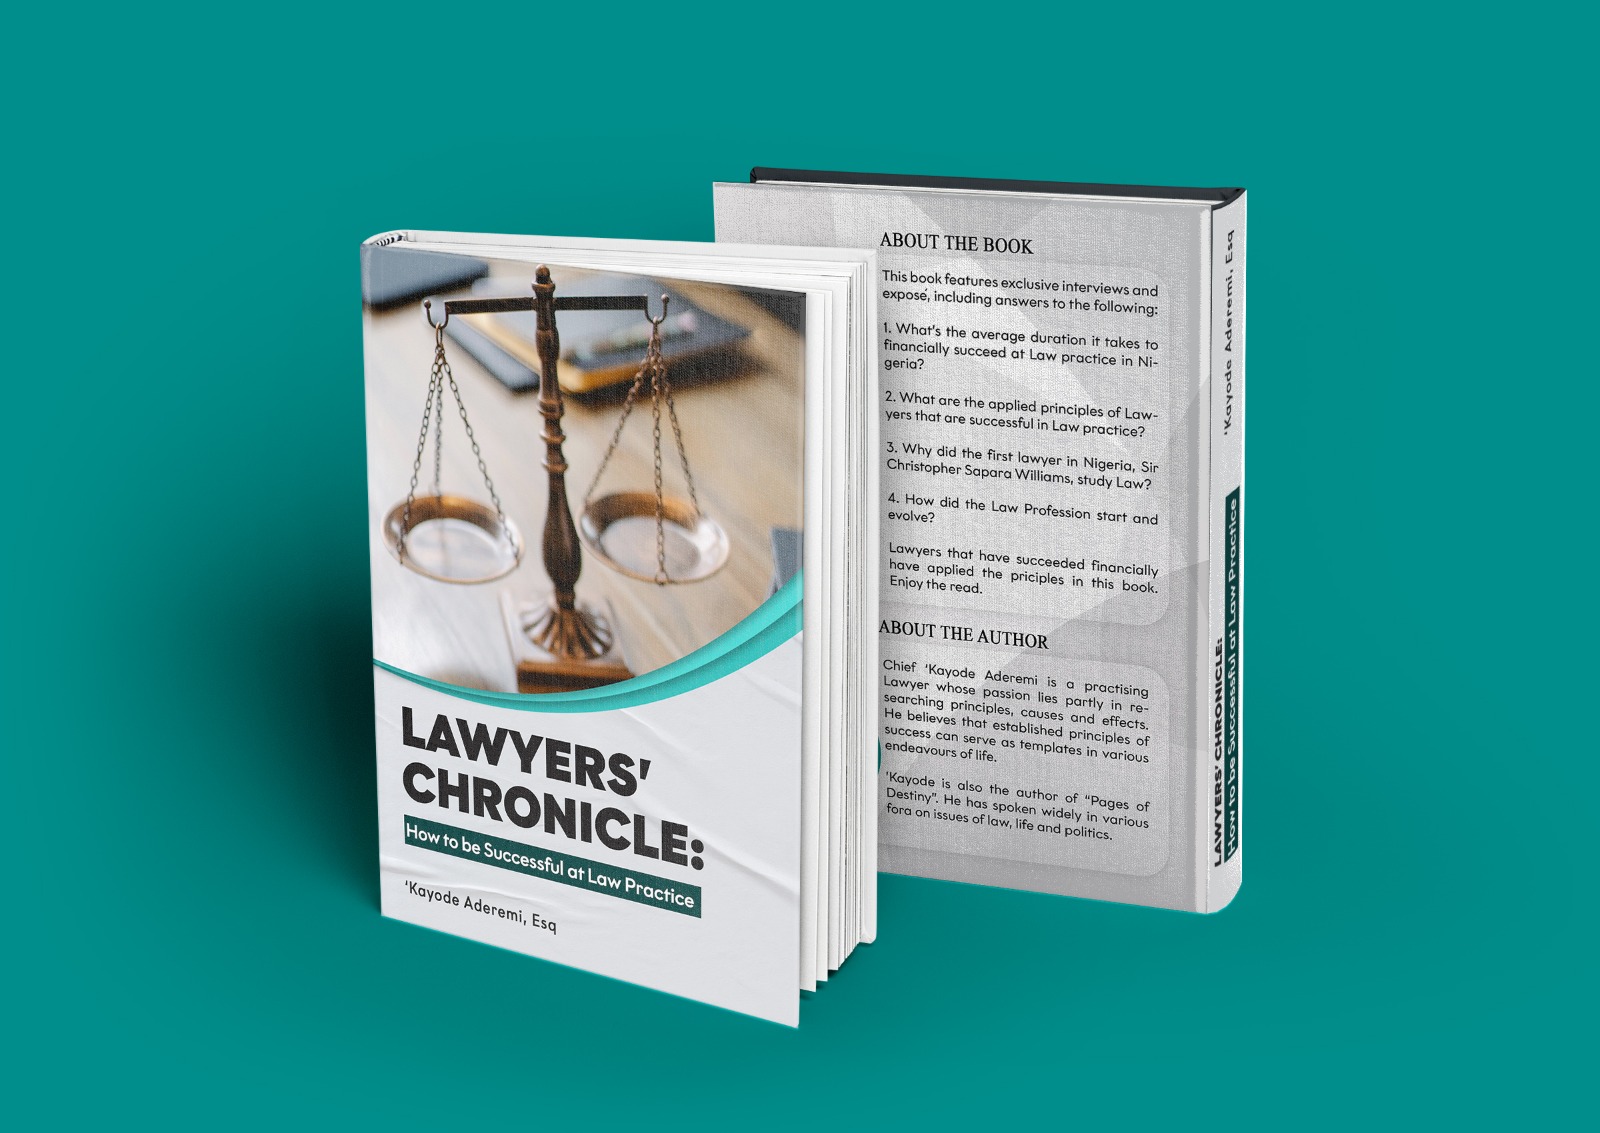 ‘Kayode Aderemi to Launch New Book ‘Lawyers’ Chronicle: How to be Successful at Law Practice’